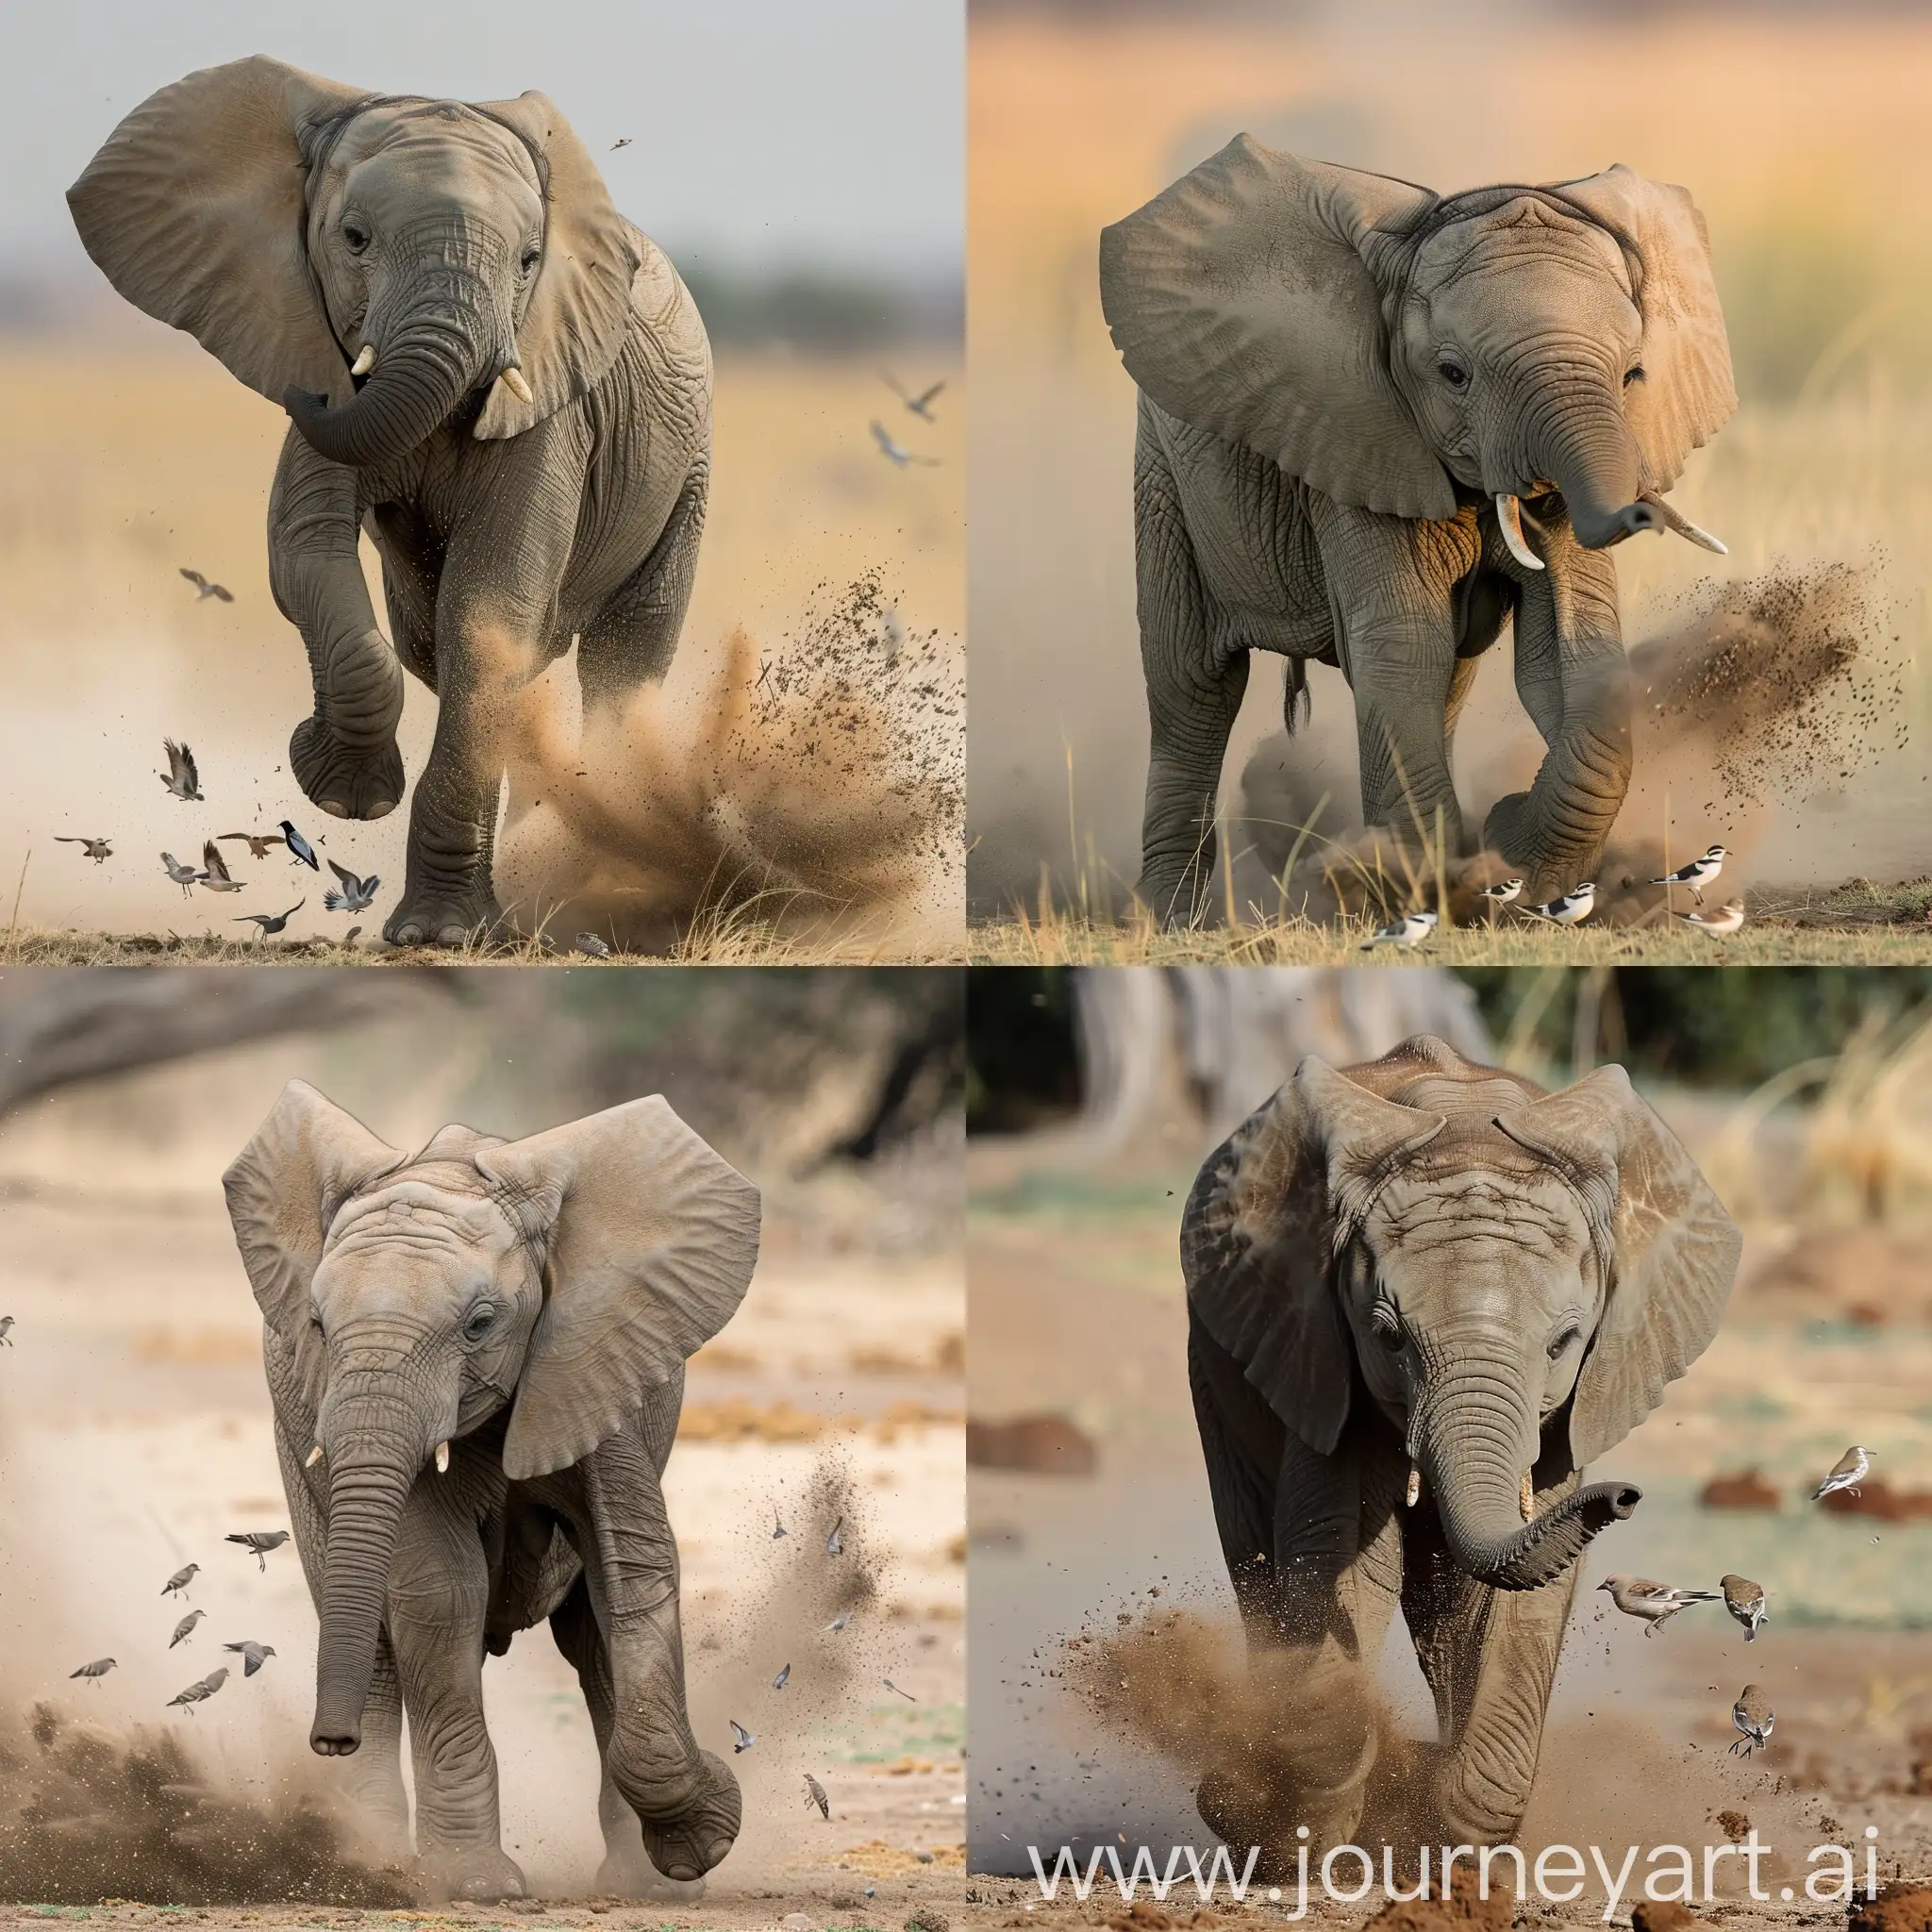  A young African elephant playfully kicks up dust with its trunk, sending a small group of birds scattering in the air.